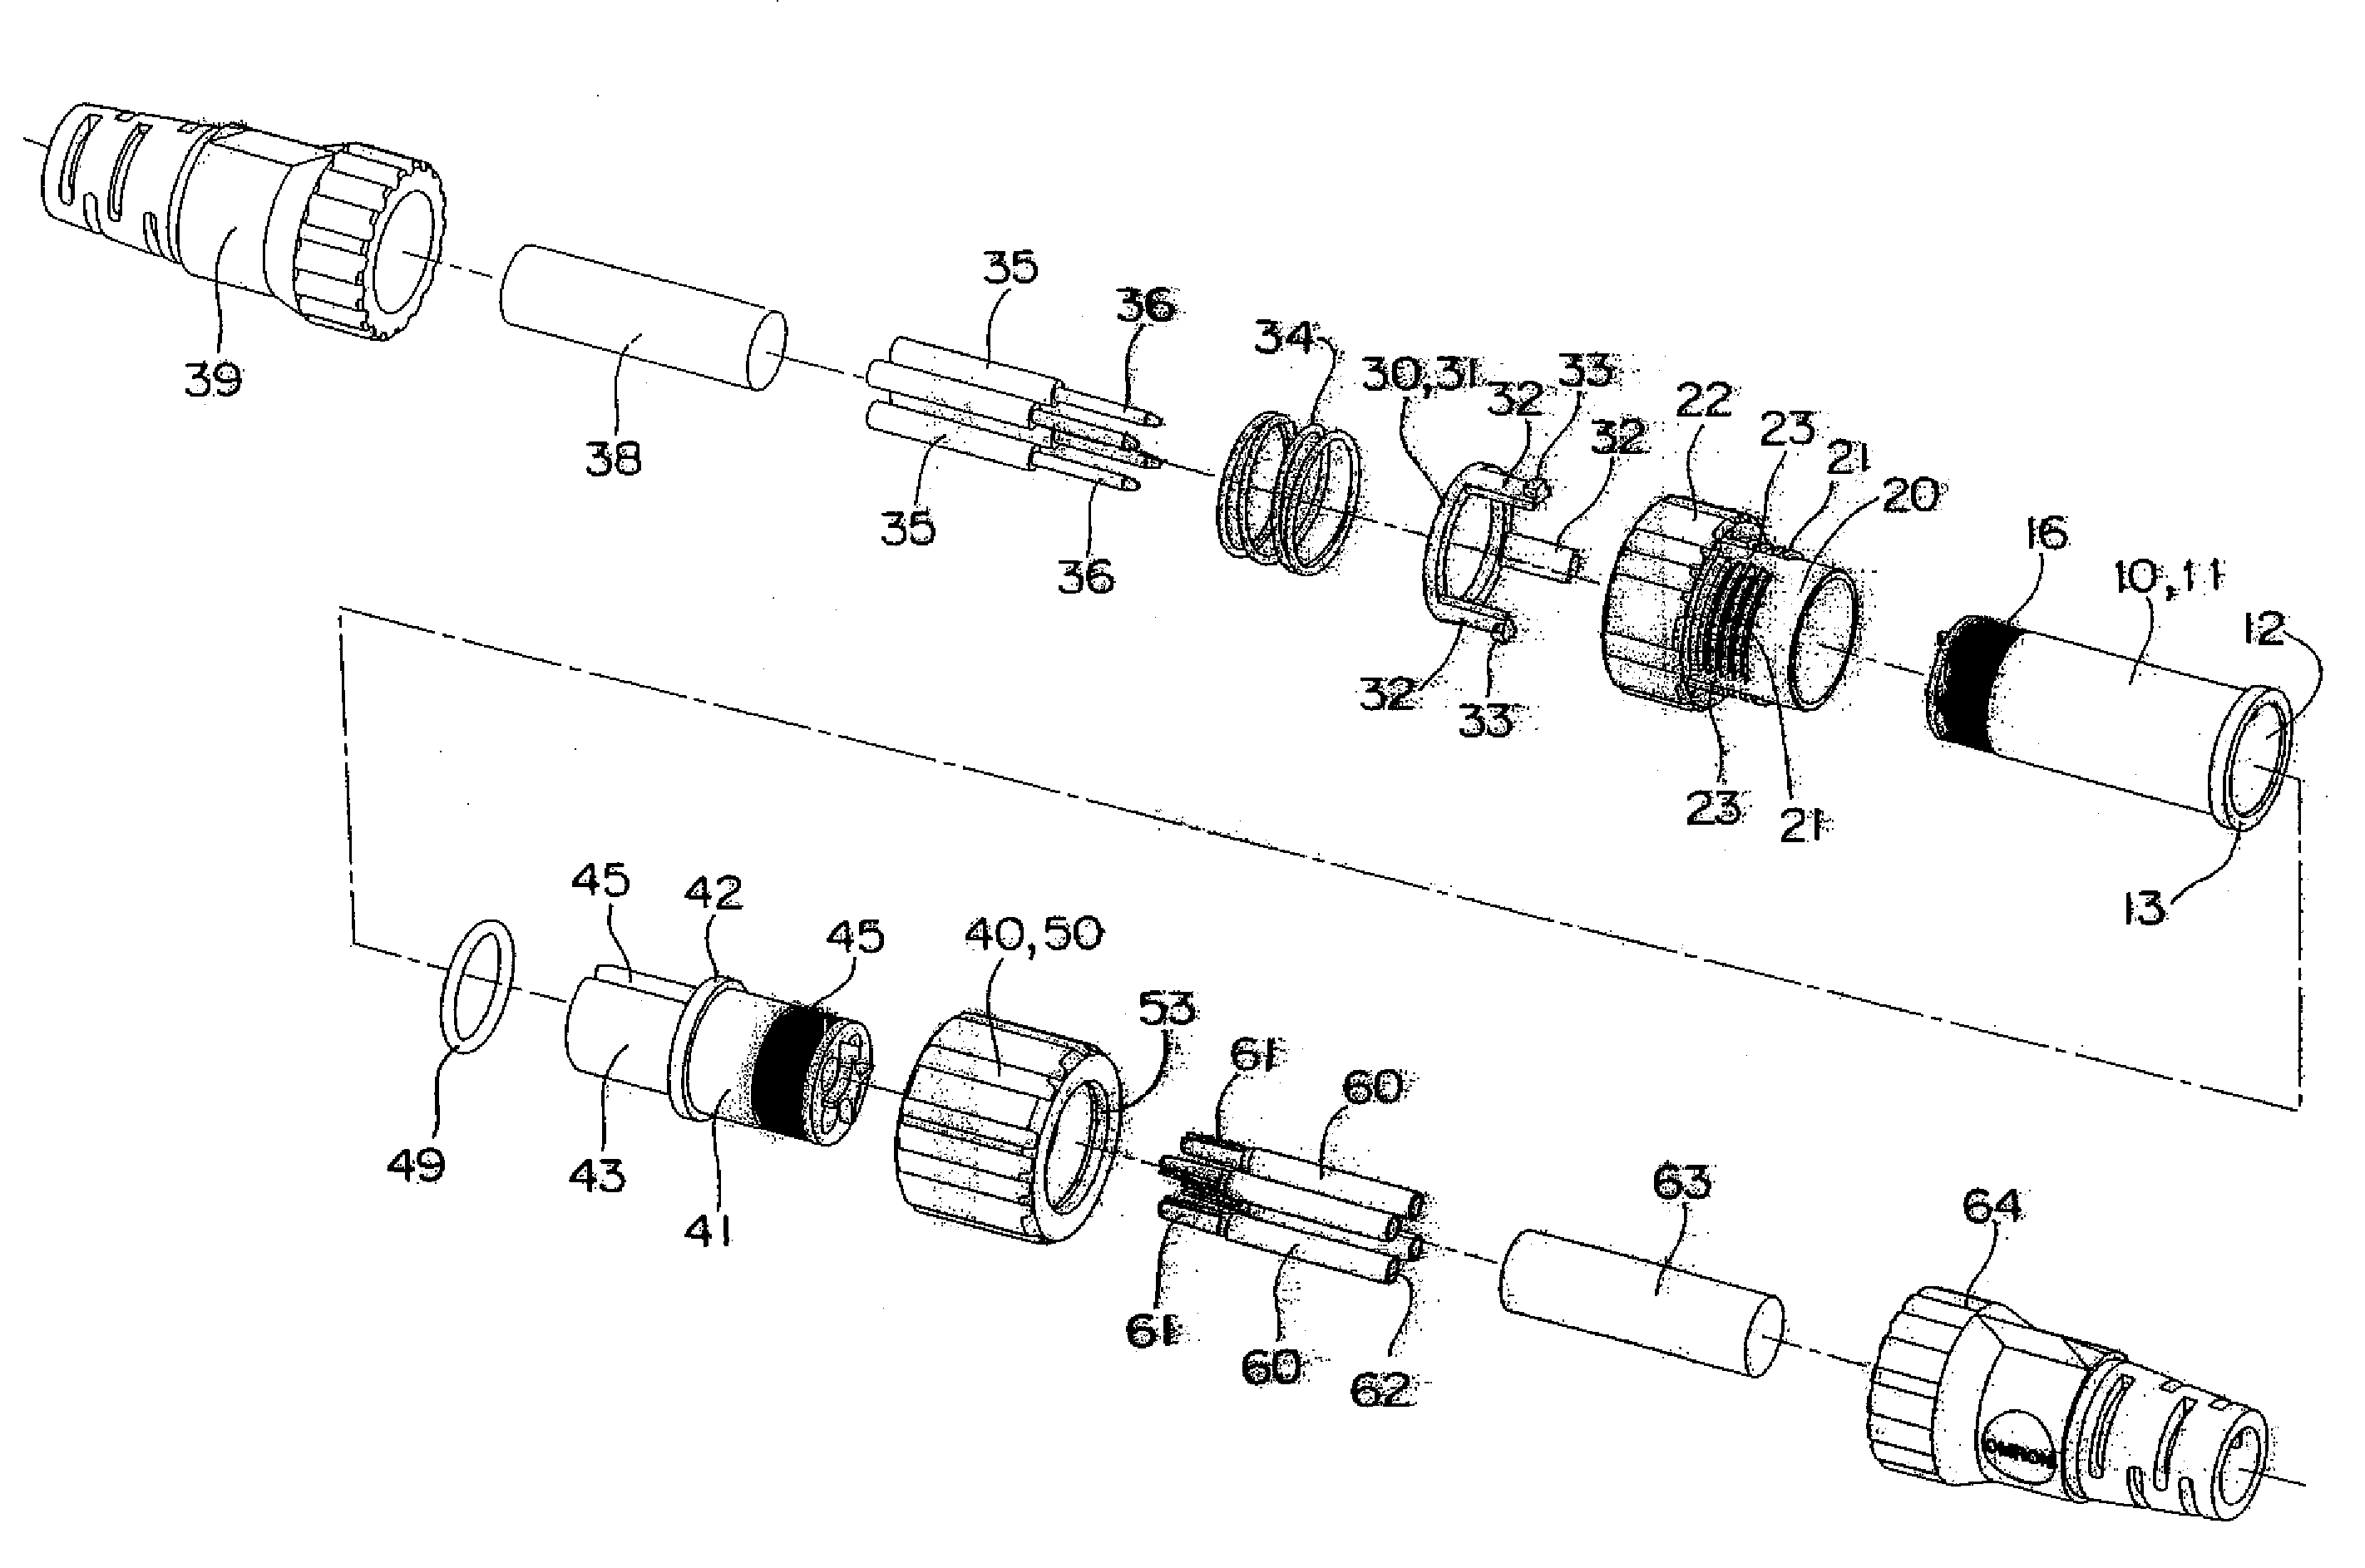 Connector for serving both screw type and bayonet type connectors